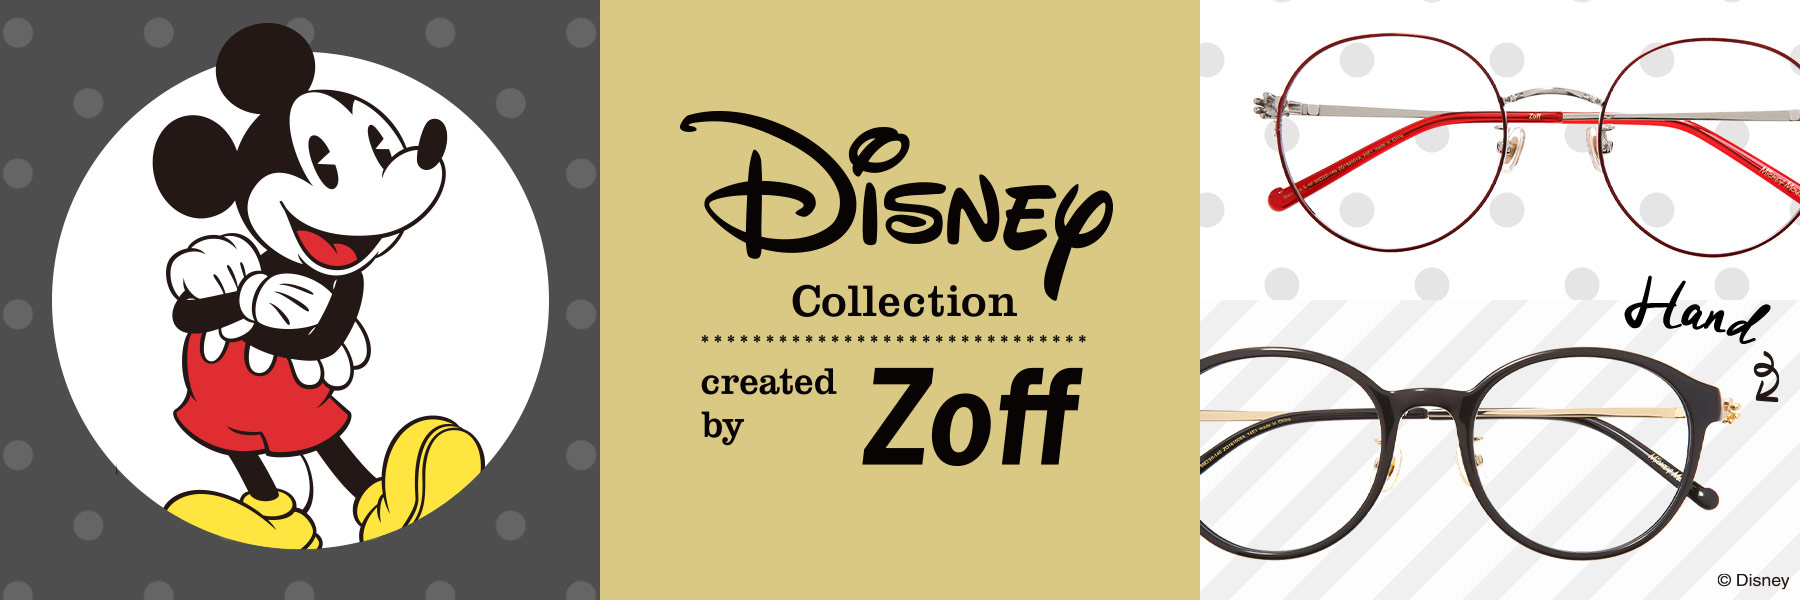 DISNEY Collection created by Zoff ©DISNEY. 